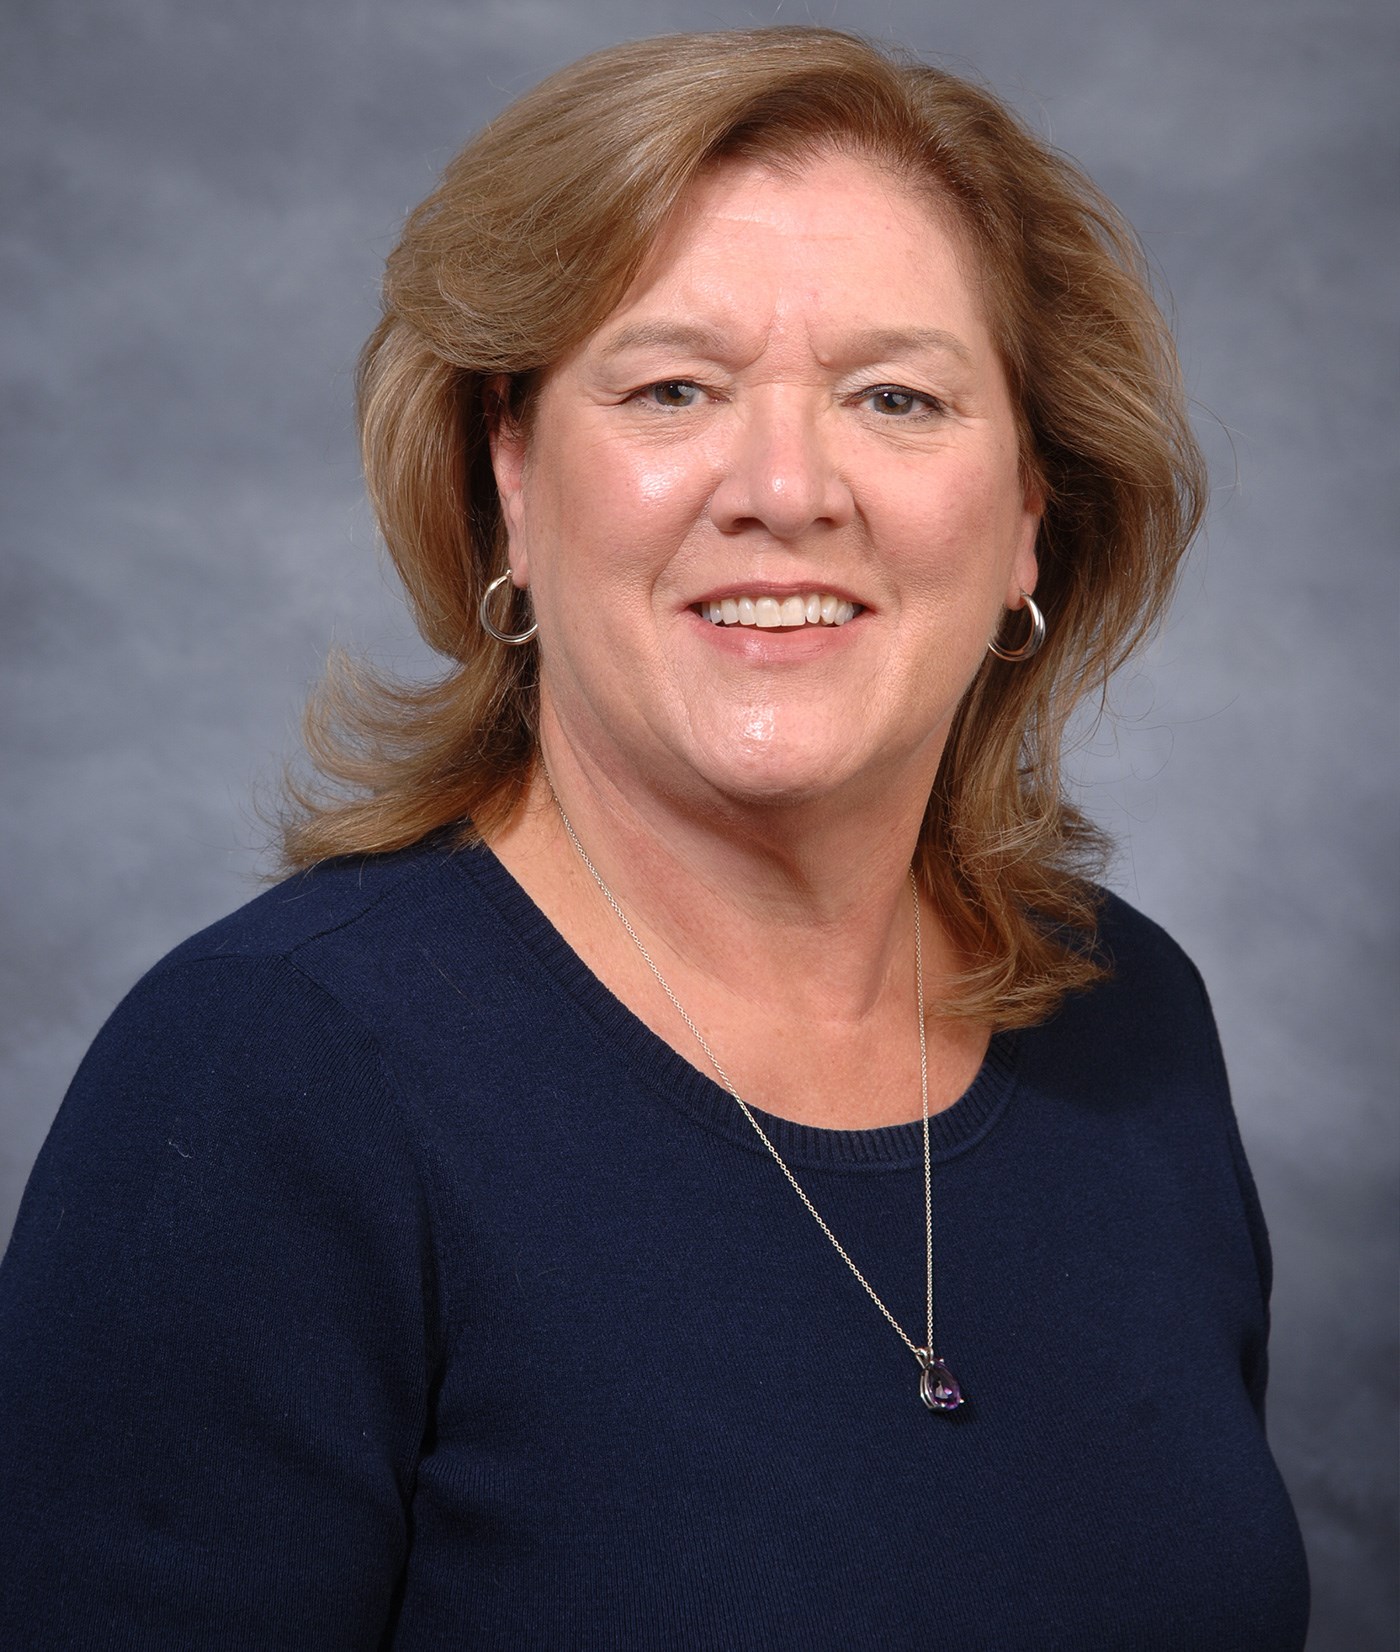 Valerie King is a Clinical Associate Professor, MS NP Coordinator in the school of Nursing at UMass Lowell.